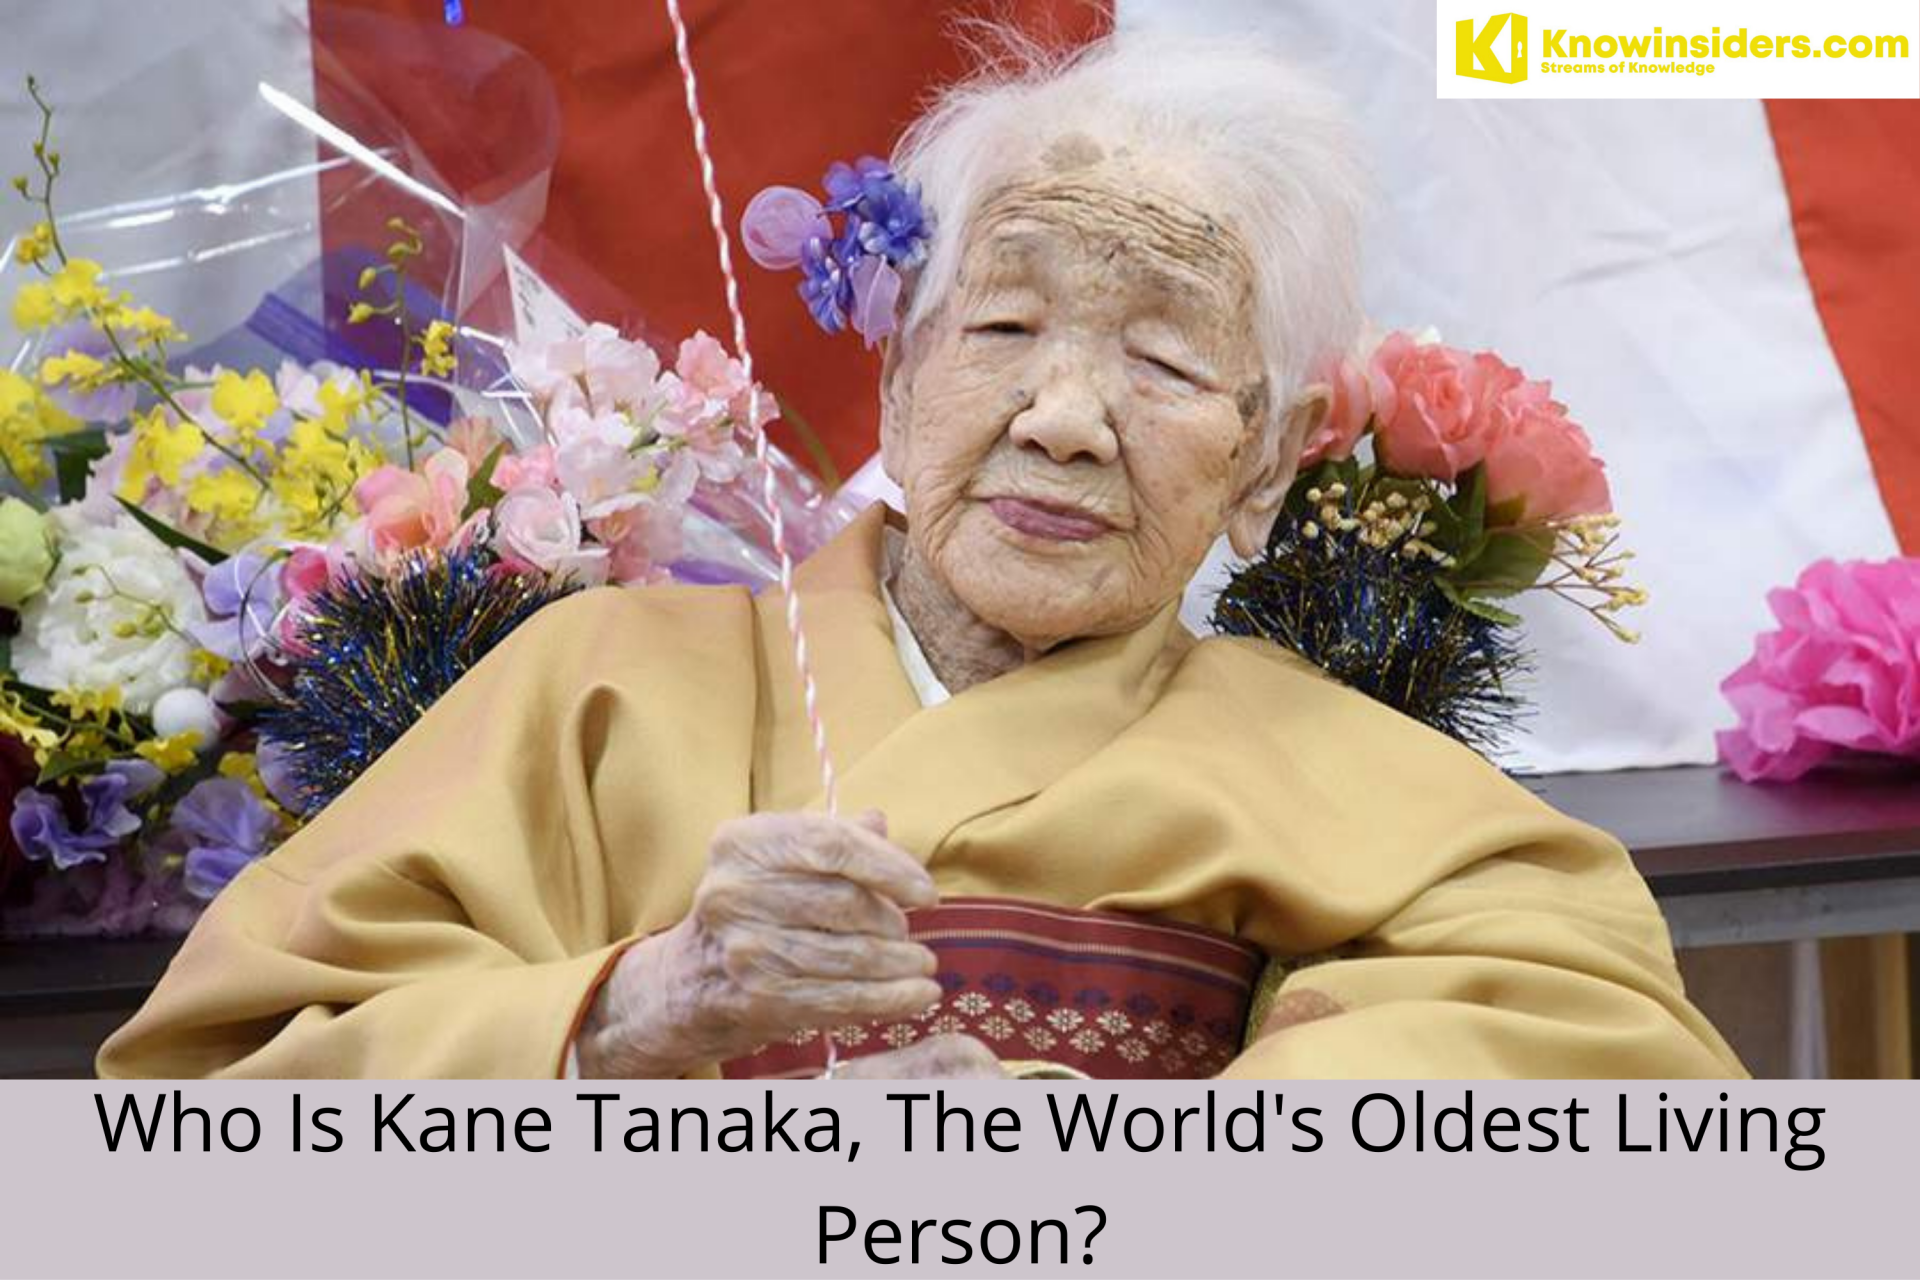 Who Is Kane Tanaka, The World's Oldest Living Person?